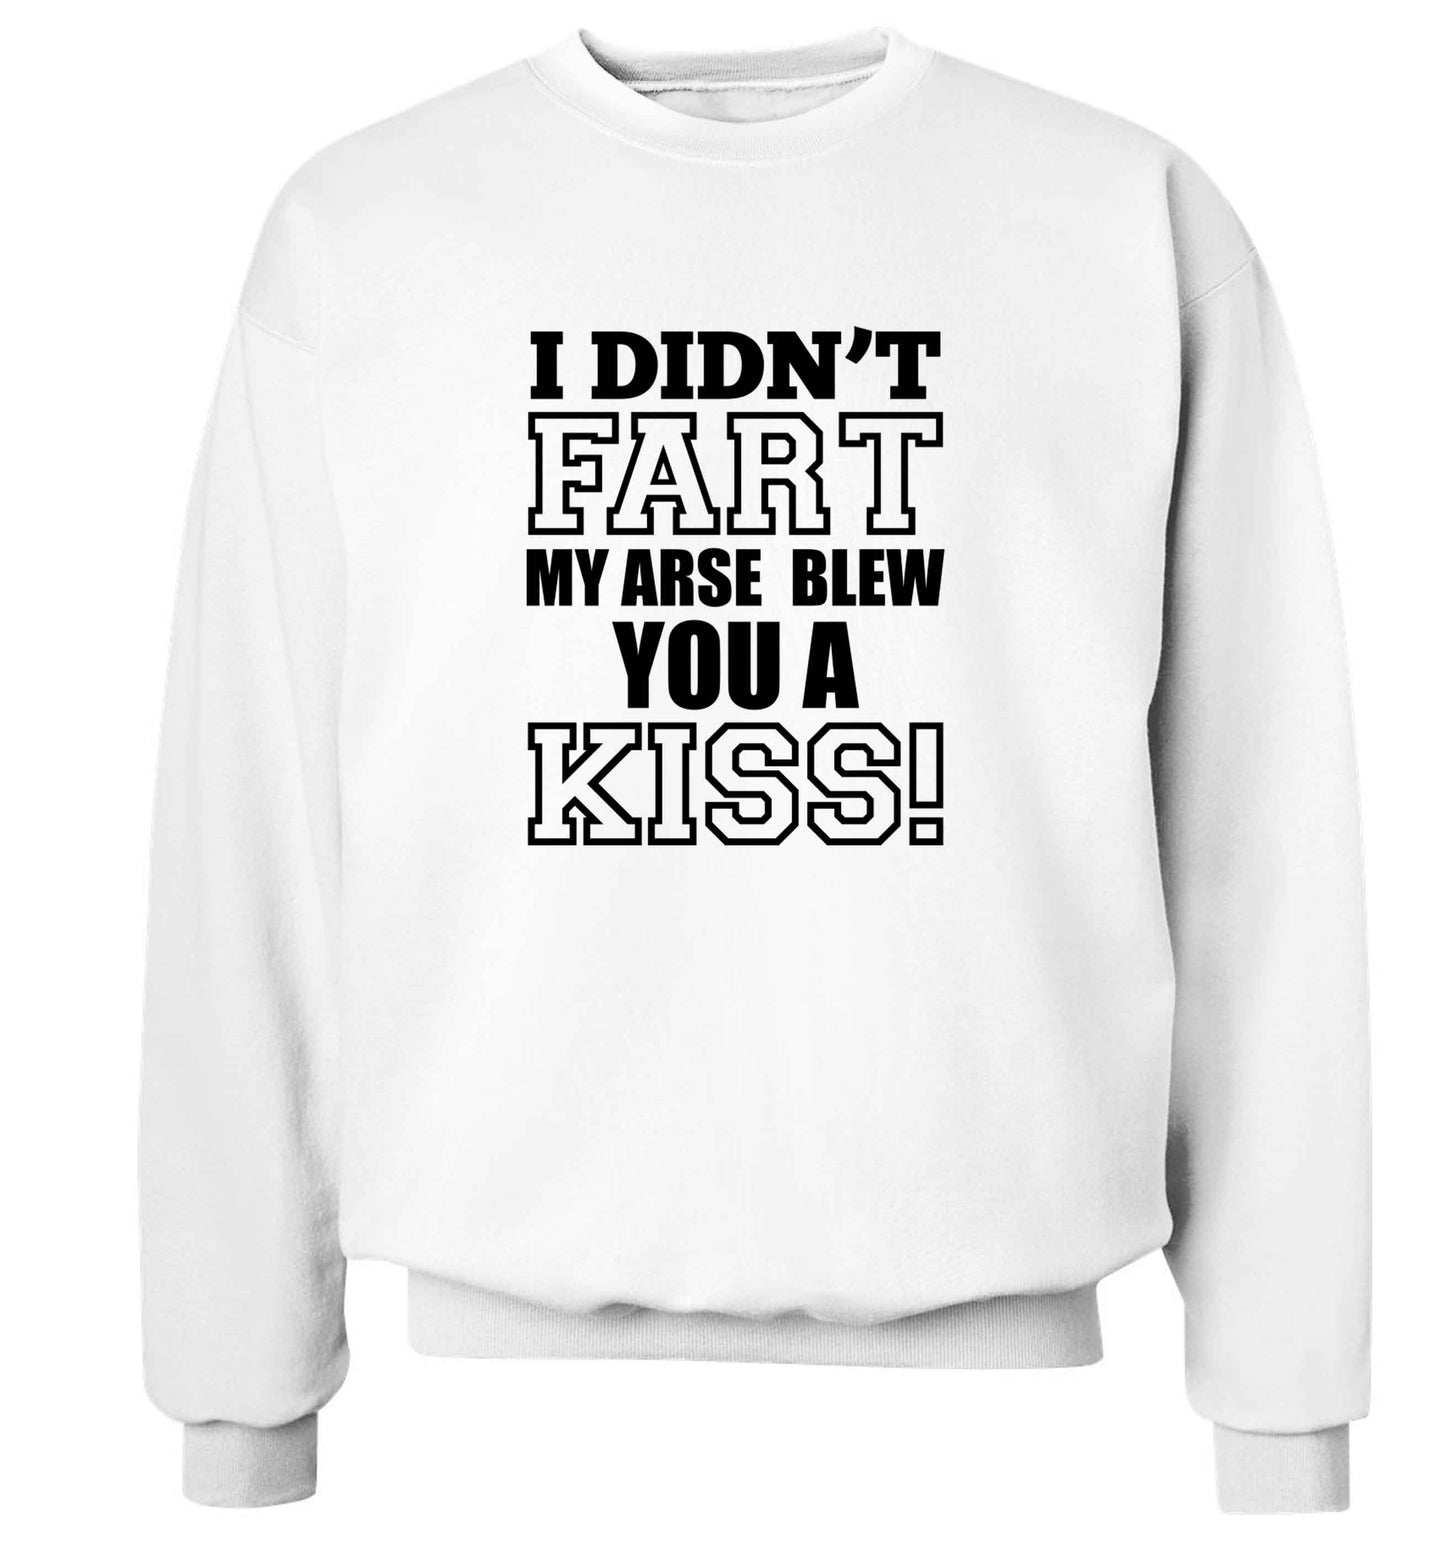 I didn't fart my arse blew you a kiss adult's unisex white sweater 2XL